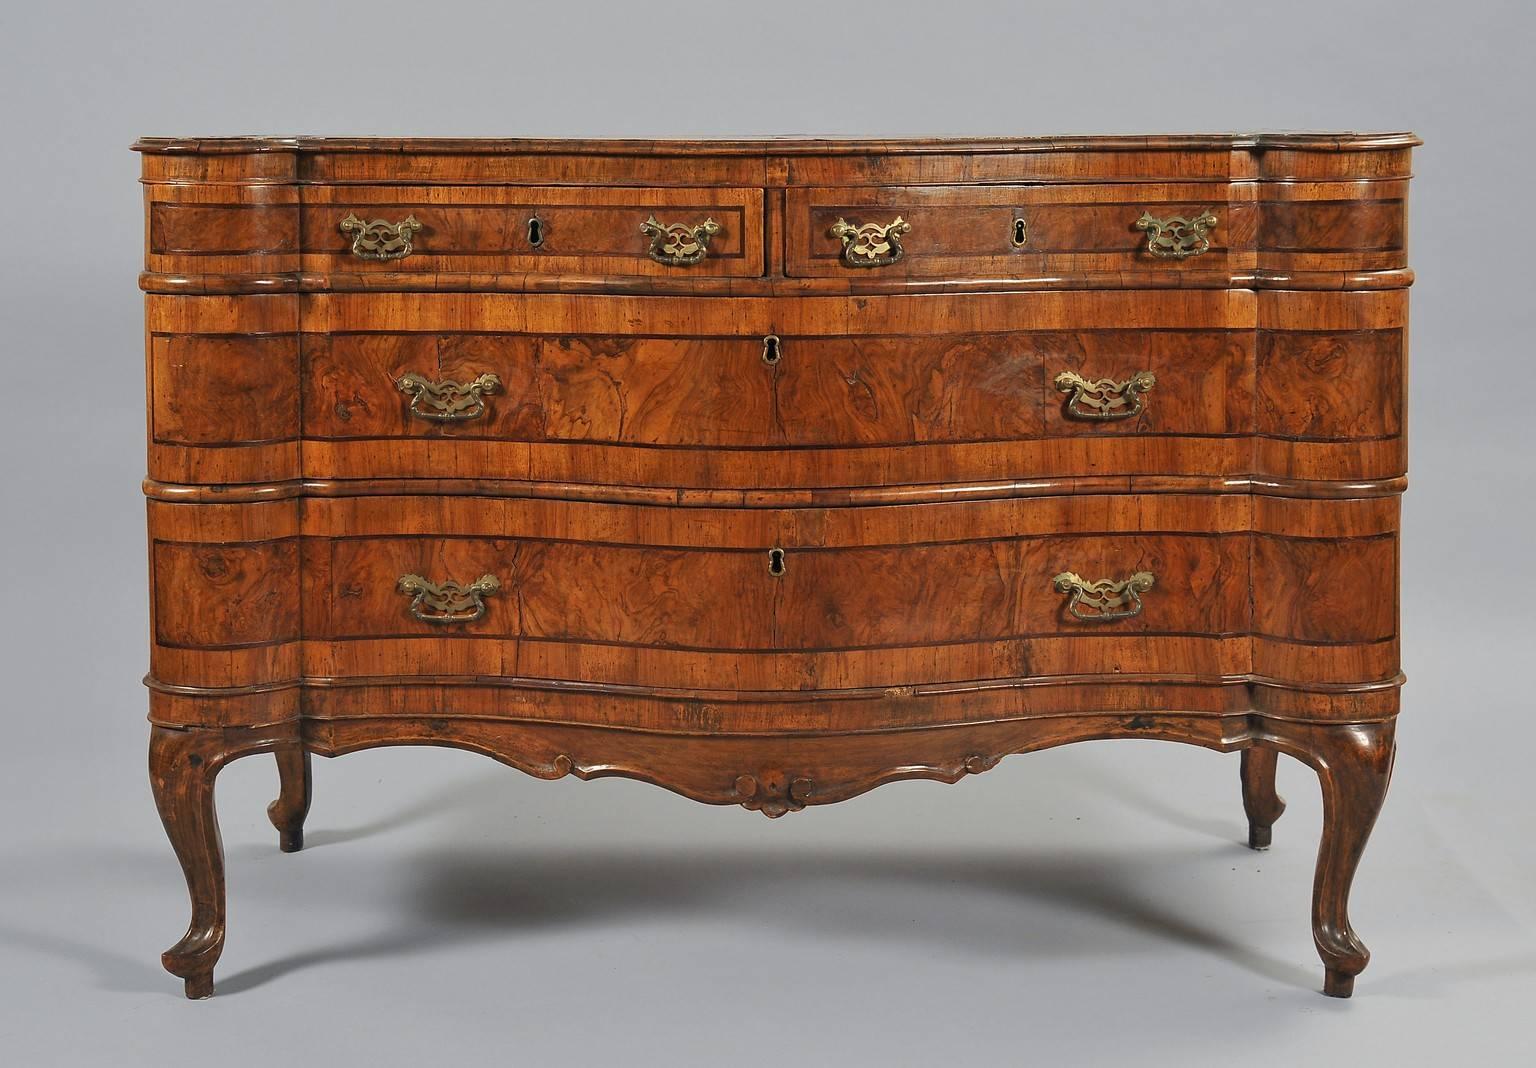 Pair of commodes with four drawers moved on the front, veneered in walnut and burl walnut, Veneto, mid-18th century.